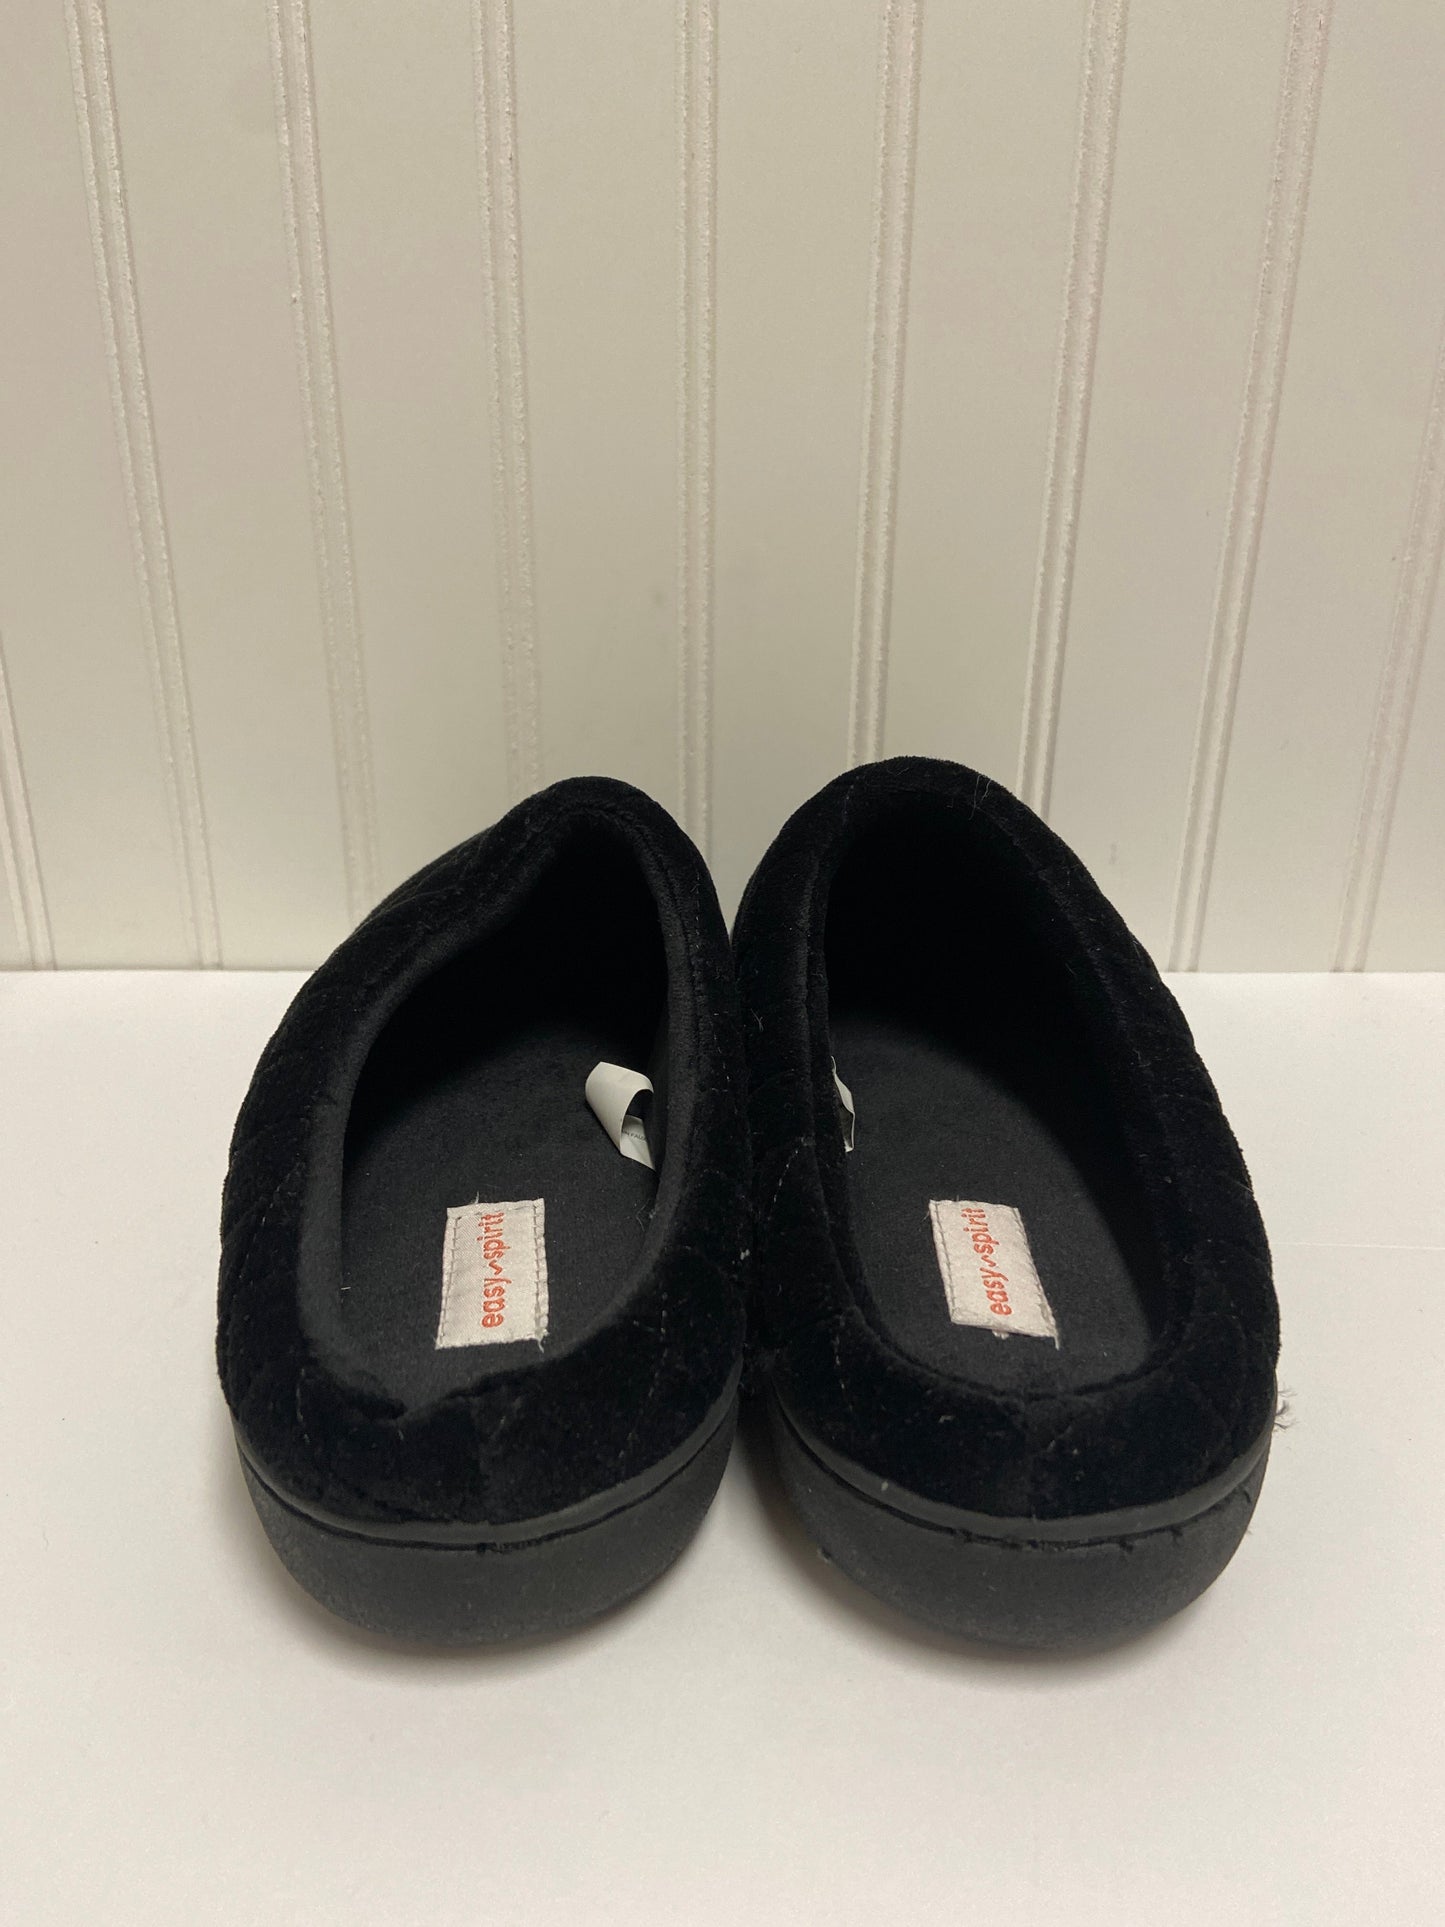 Slippers By Easy Spirit  Size: 8